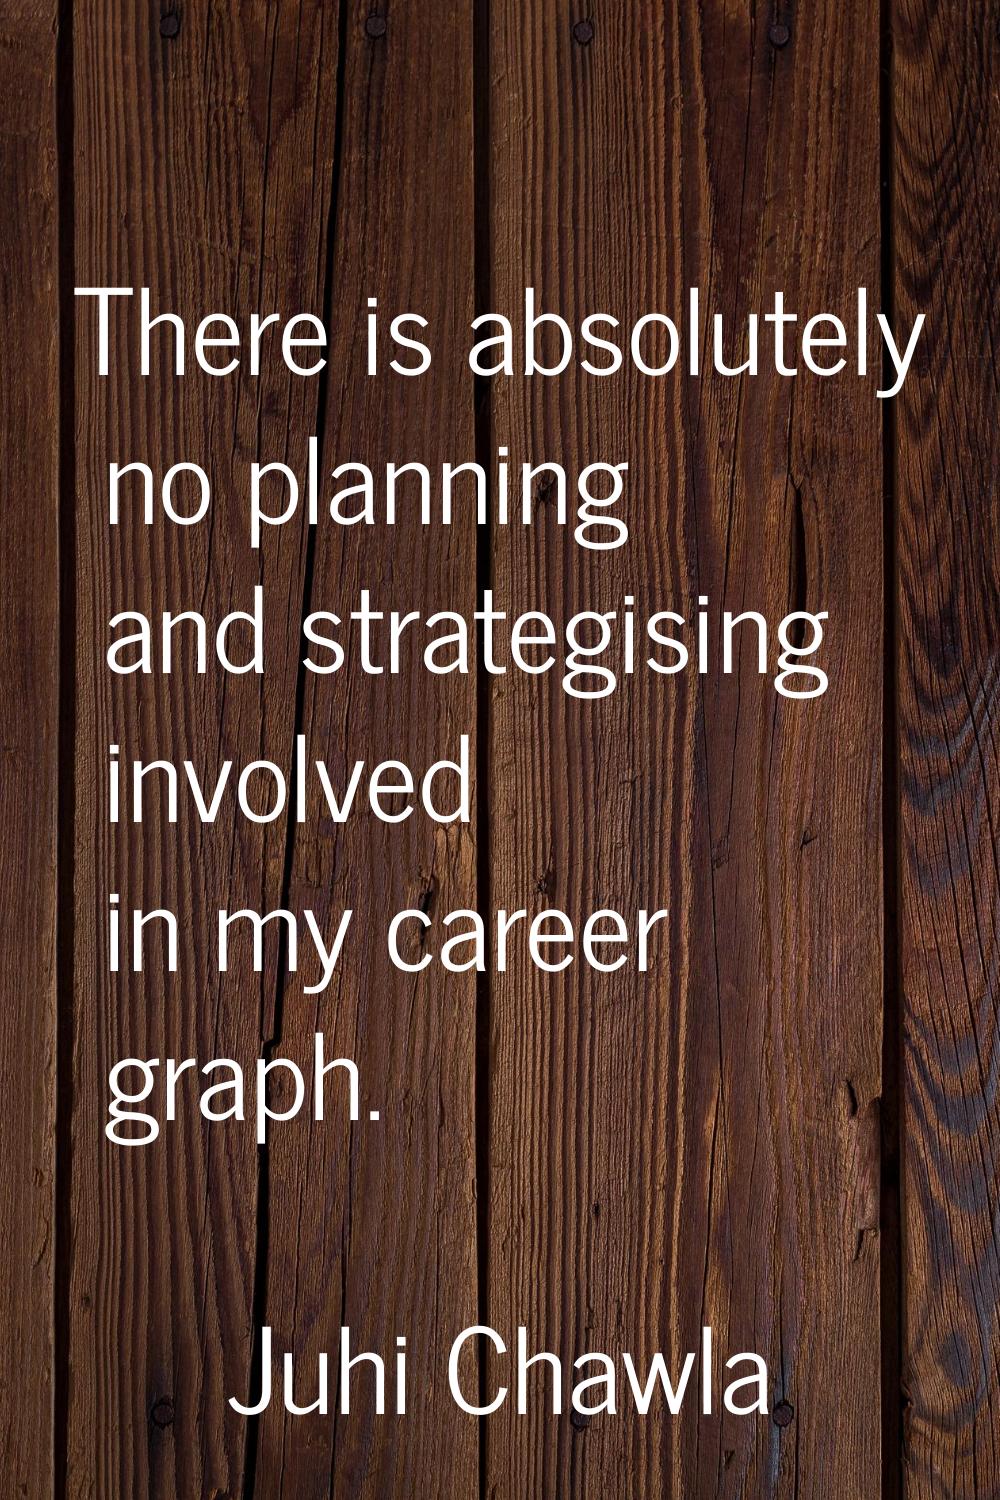 There is absolutely no planning and strategising involved in my career graph.